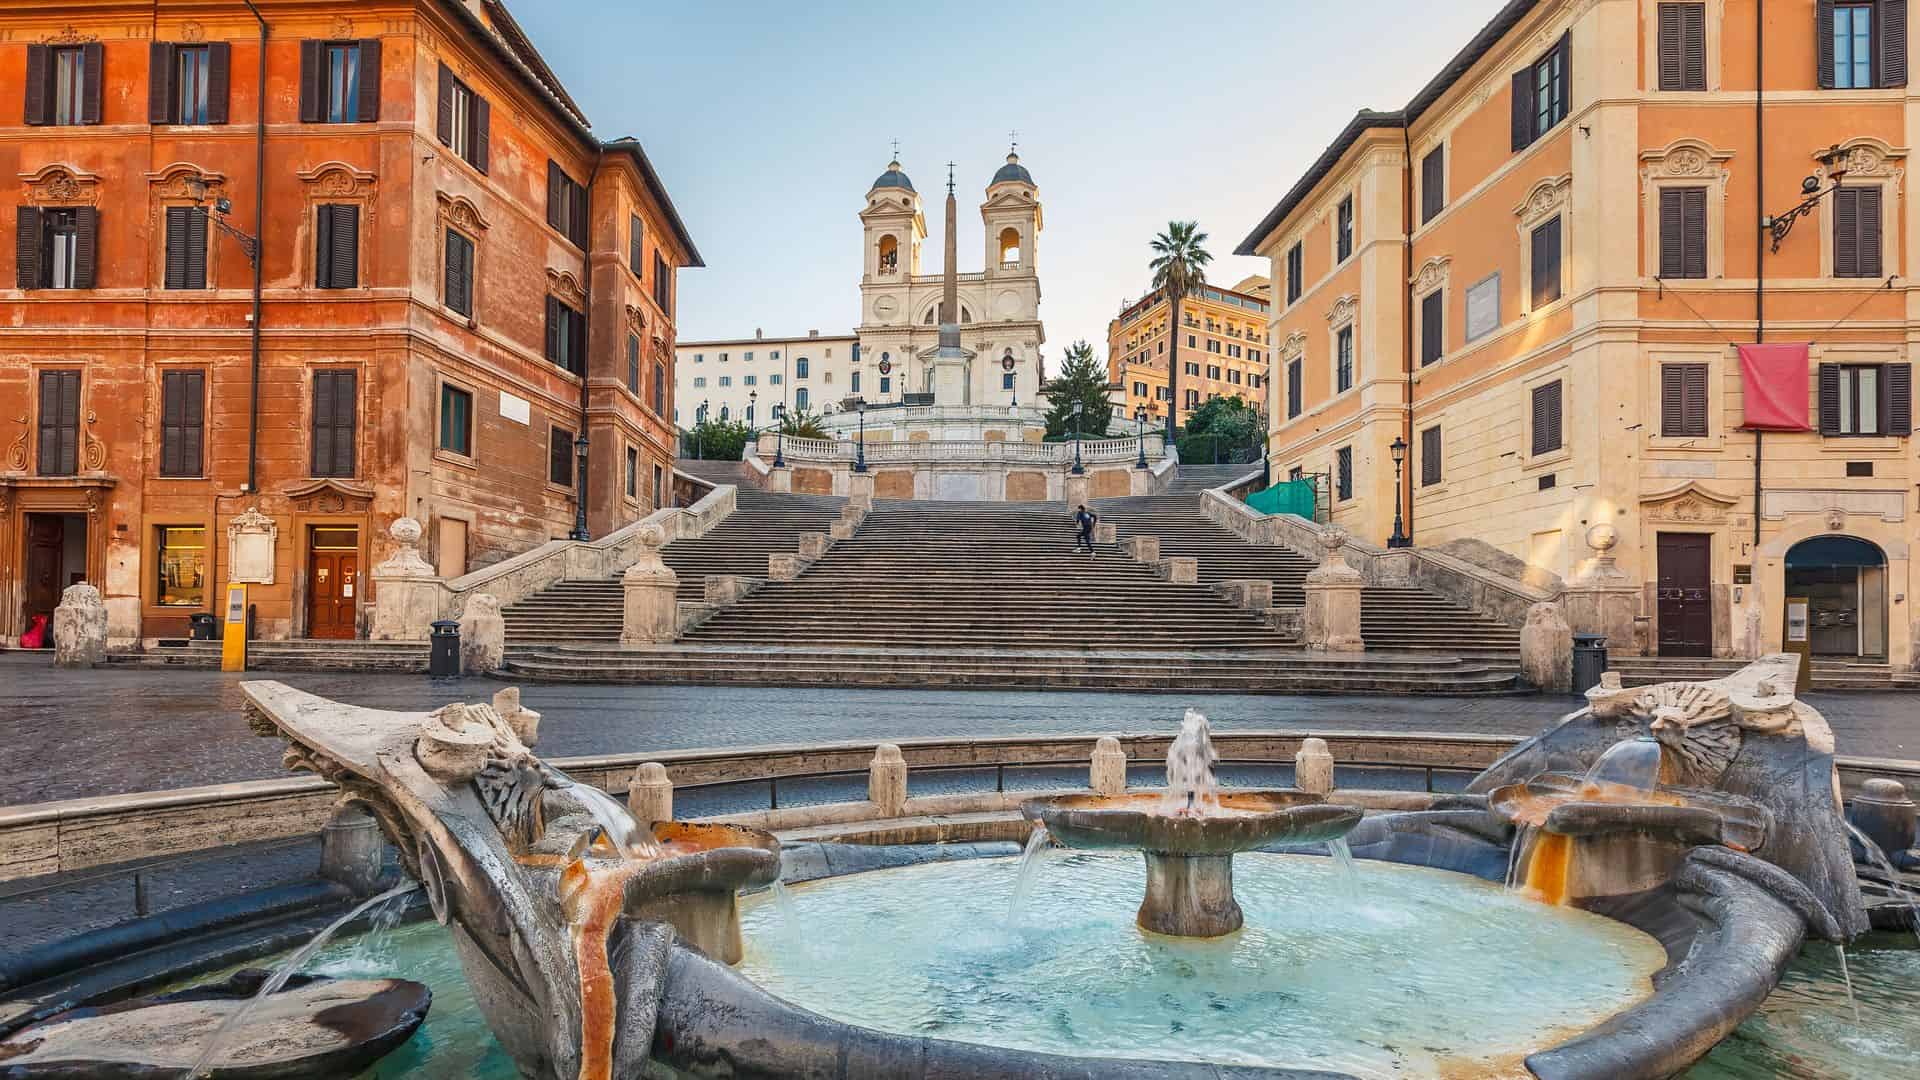 View of the Spanish Steps from Piazza di Spagna in Rome